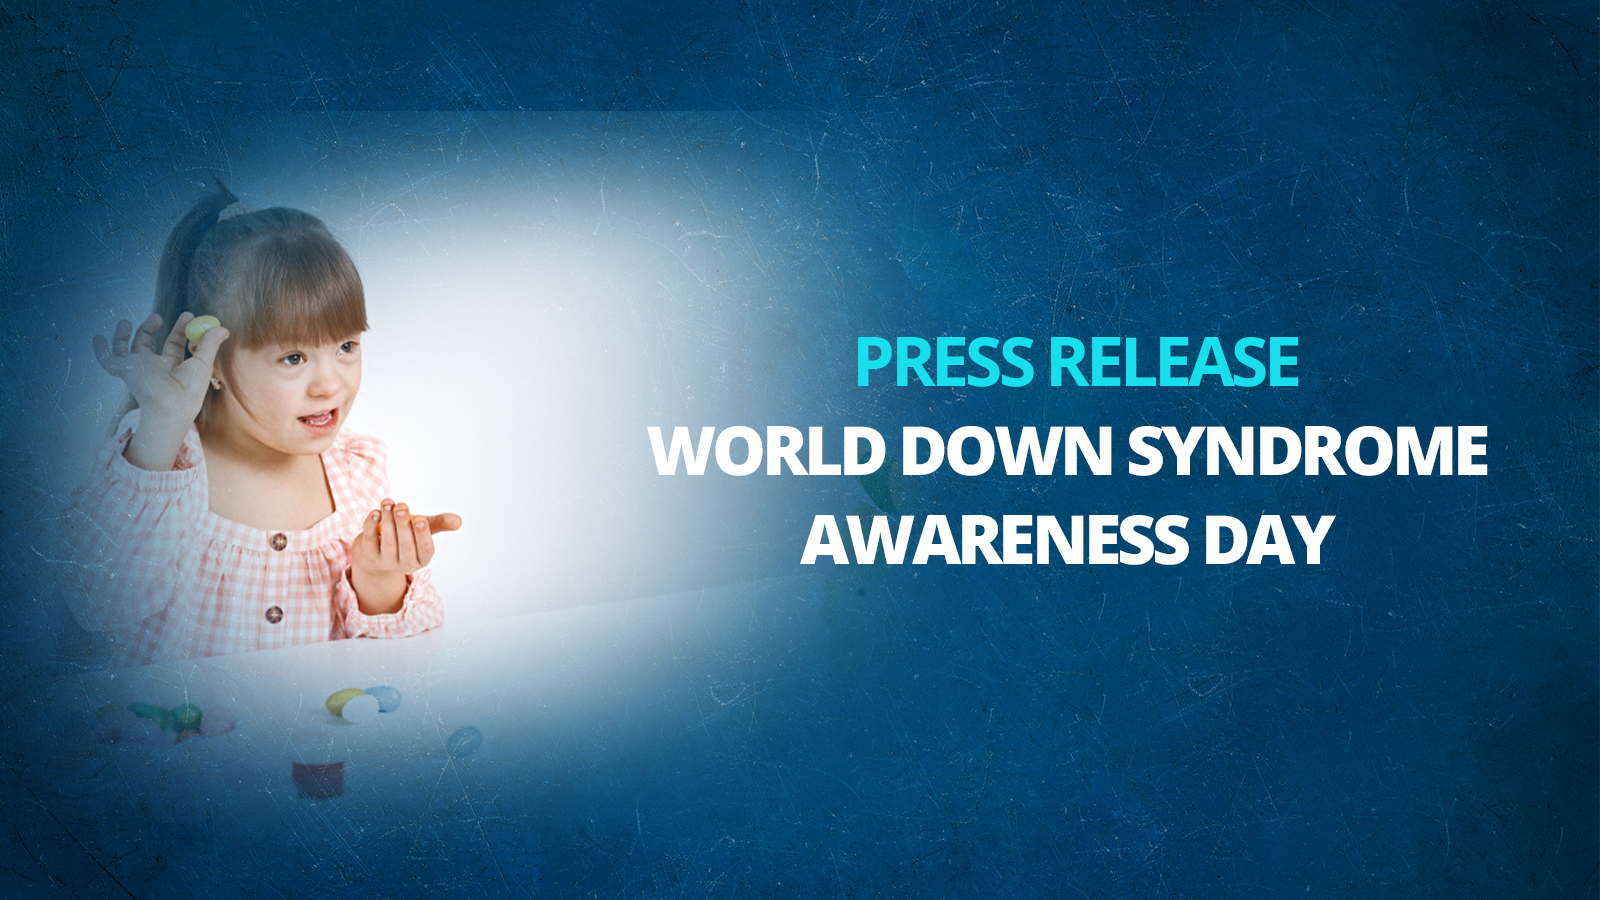 Press Release on World Down Syndrome Awareness Day 